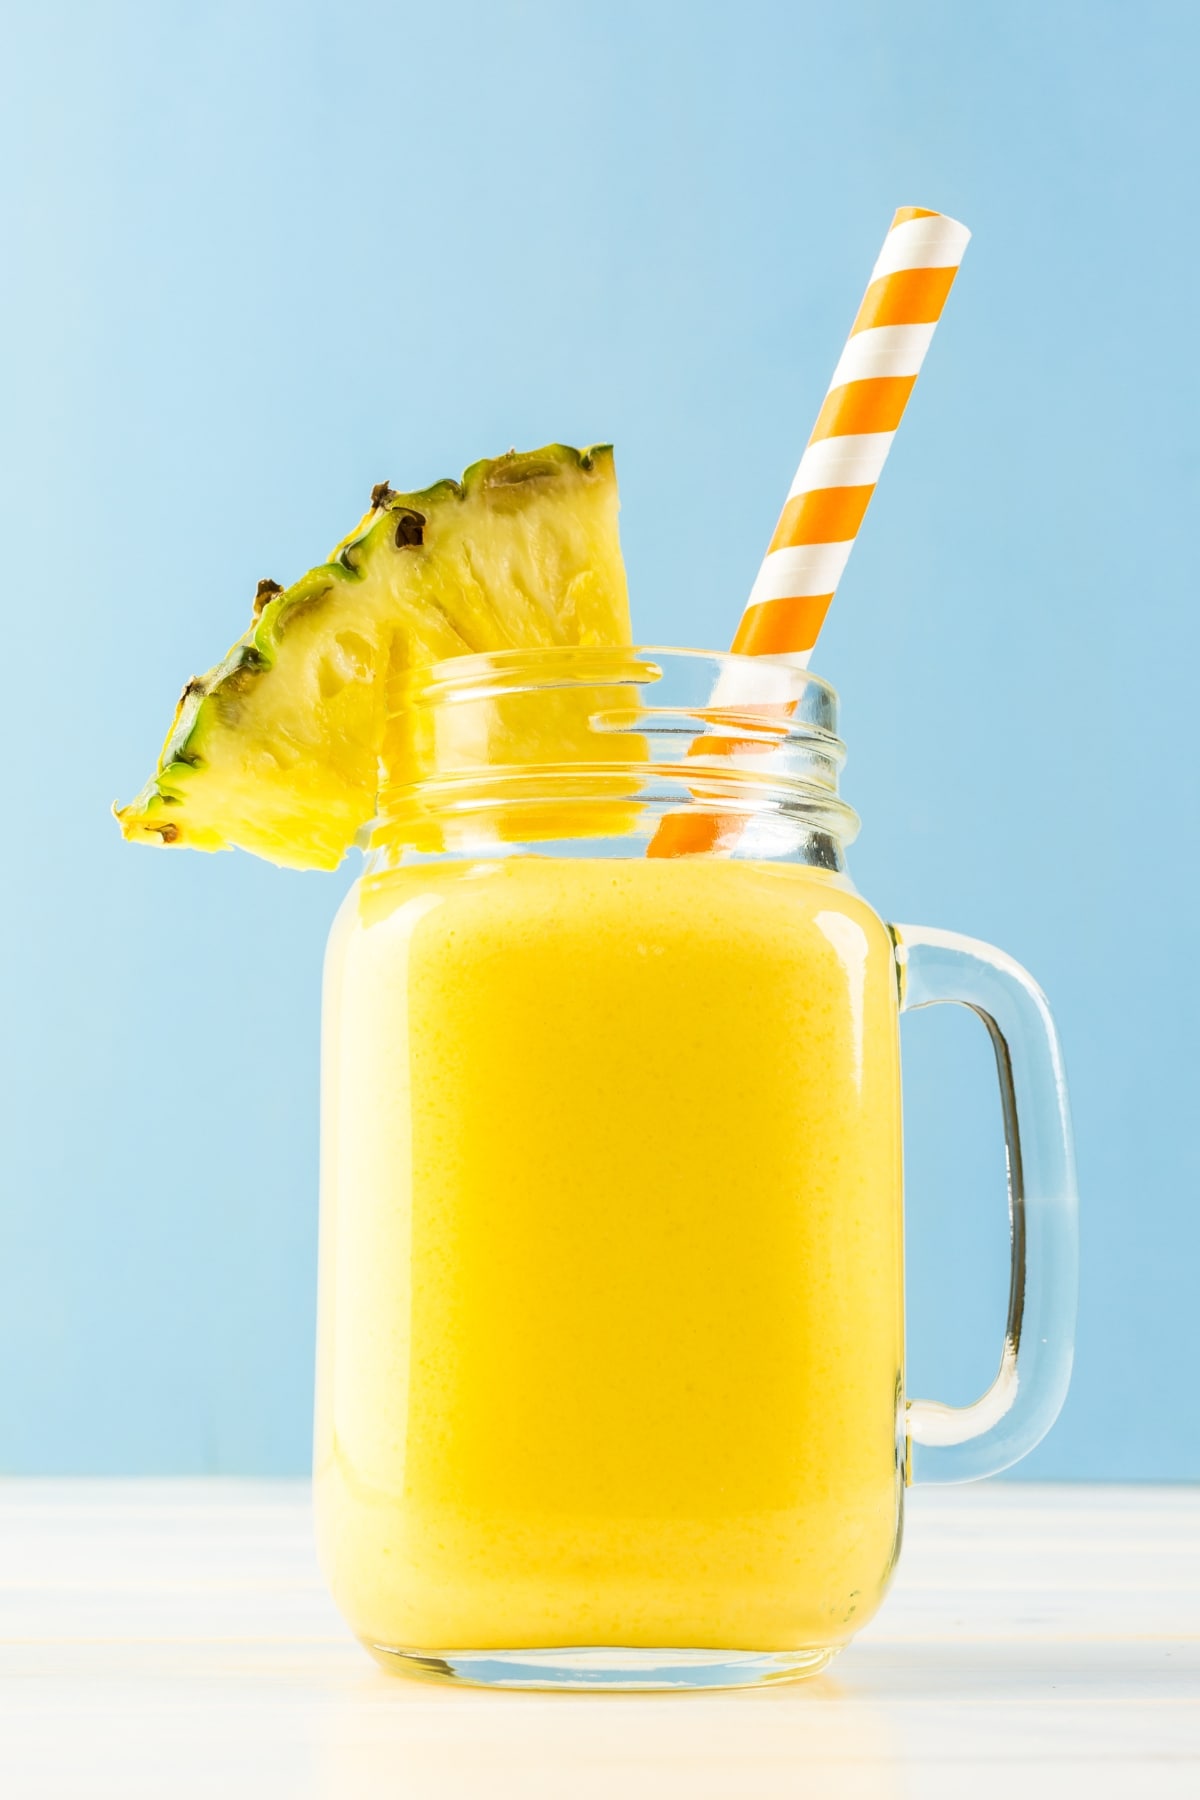 Refreshing Pineapple Smoothie with Fresh Fruit in a Glass Jar